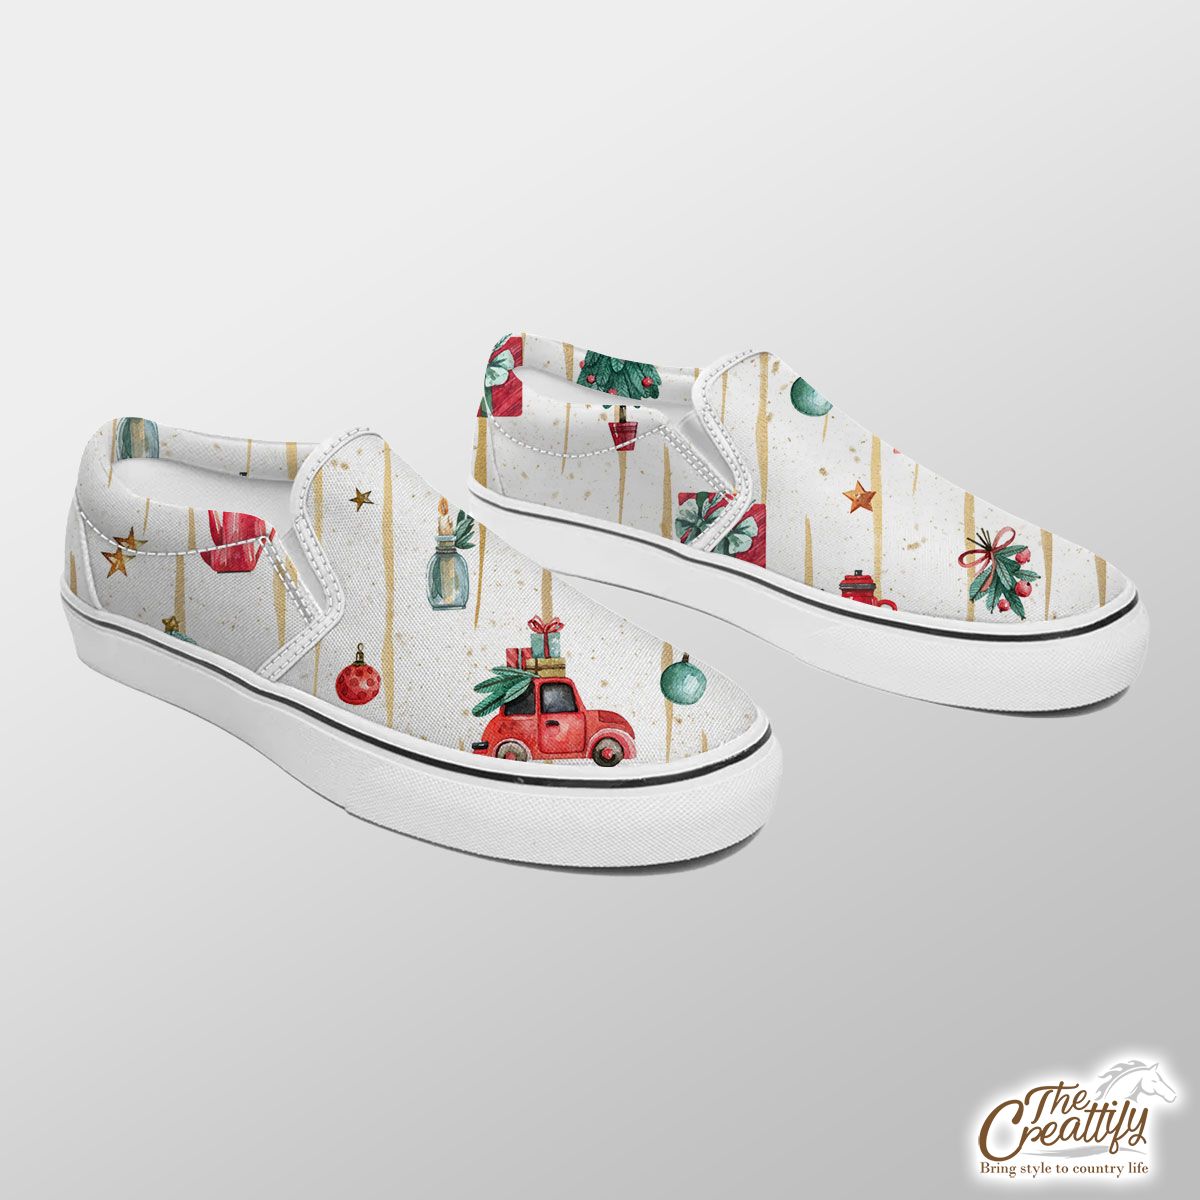 Watercolor Christmas Car With Christmas Gifts, Balls, Wreath And Star Pattern Slip On Sneakers